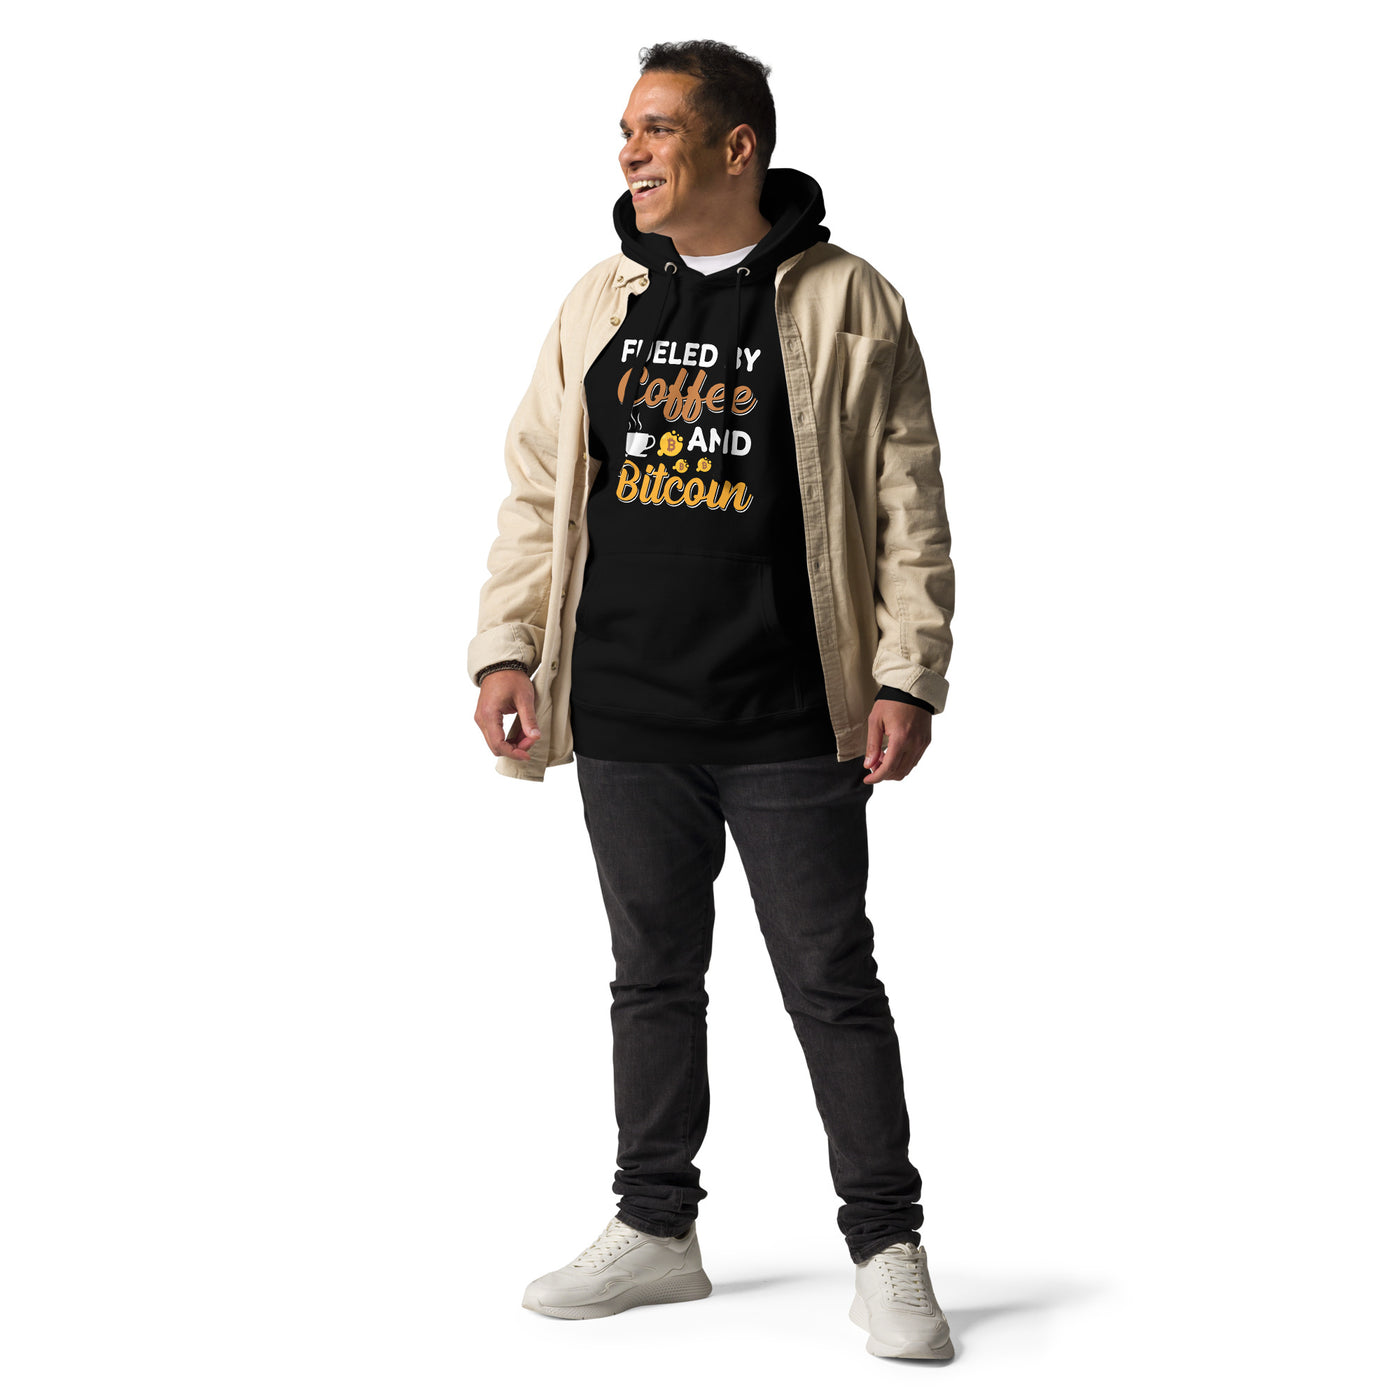 Fueled by Coffee and Bitcoin V1 - Unisex Hoodie